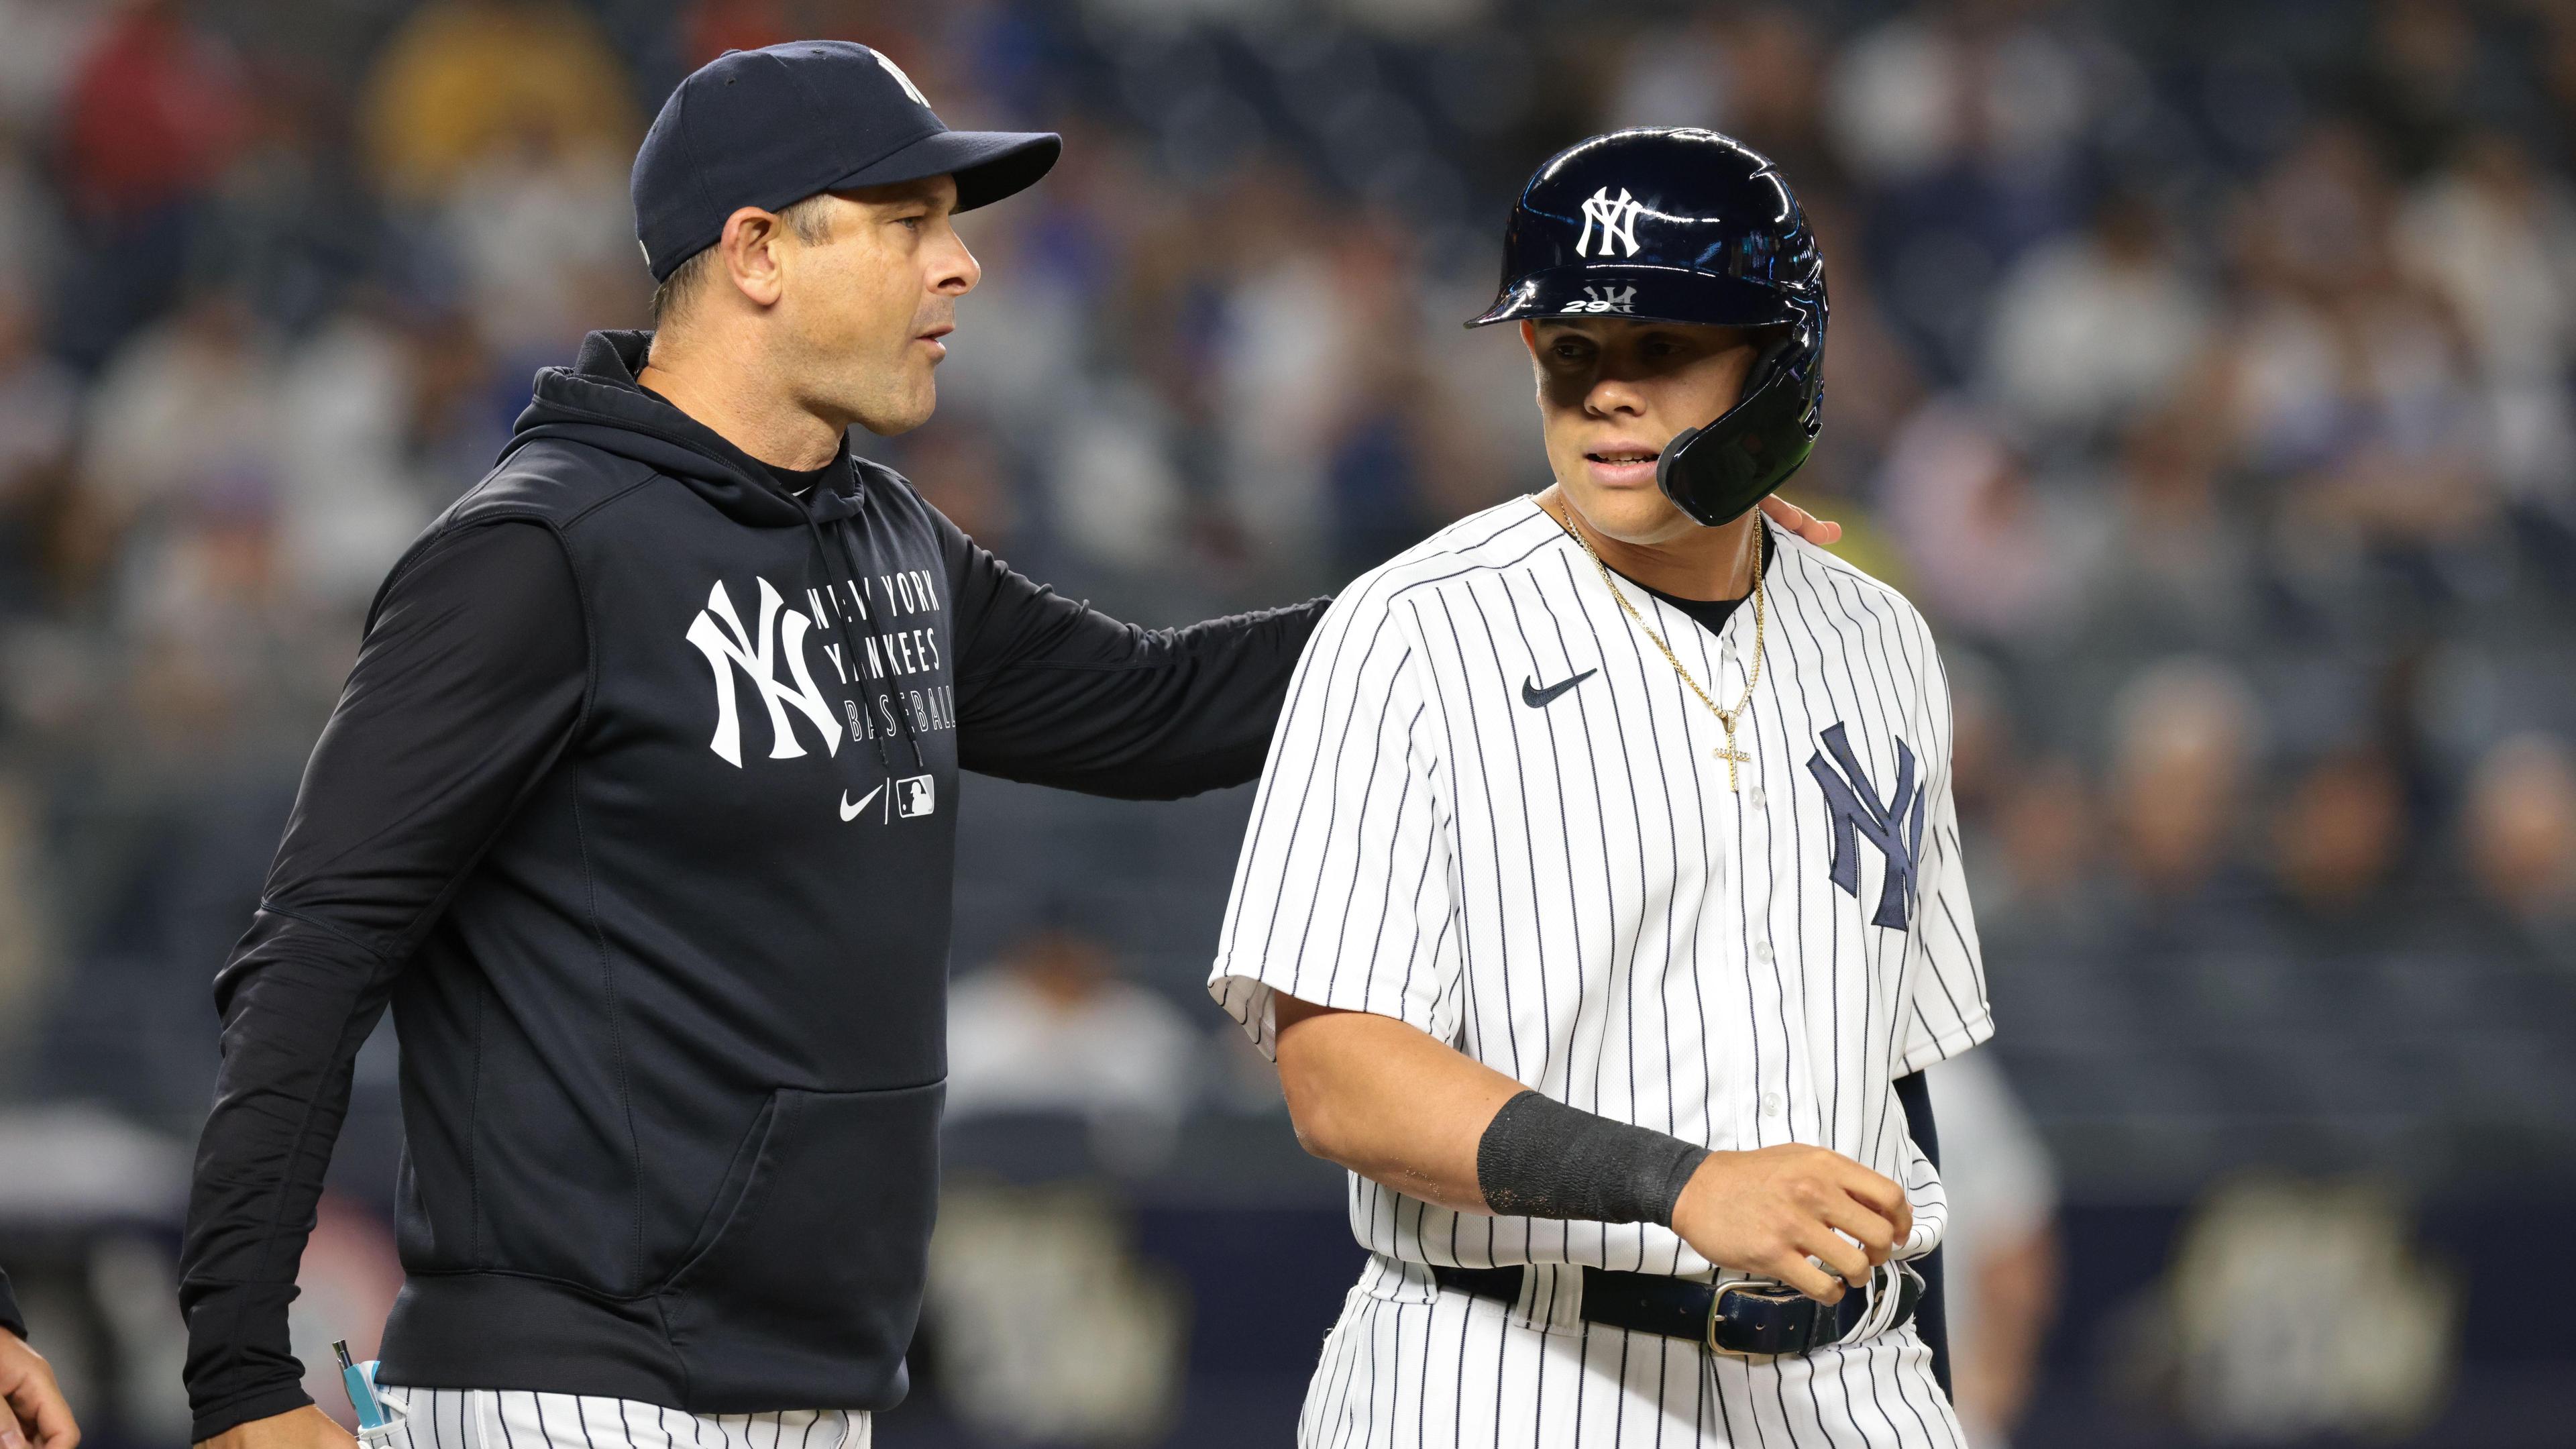 New York Yankees manager Aaron Boone (17) talks with third baseman Gio Urshela (29) during the seventh inning against the Kansas City Royals at Yankee Stadium. / Vincent Carchietta-USA TODAY Sports